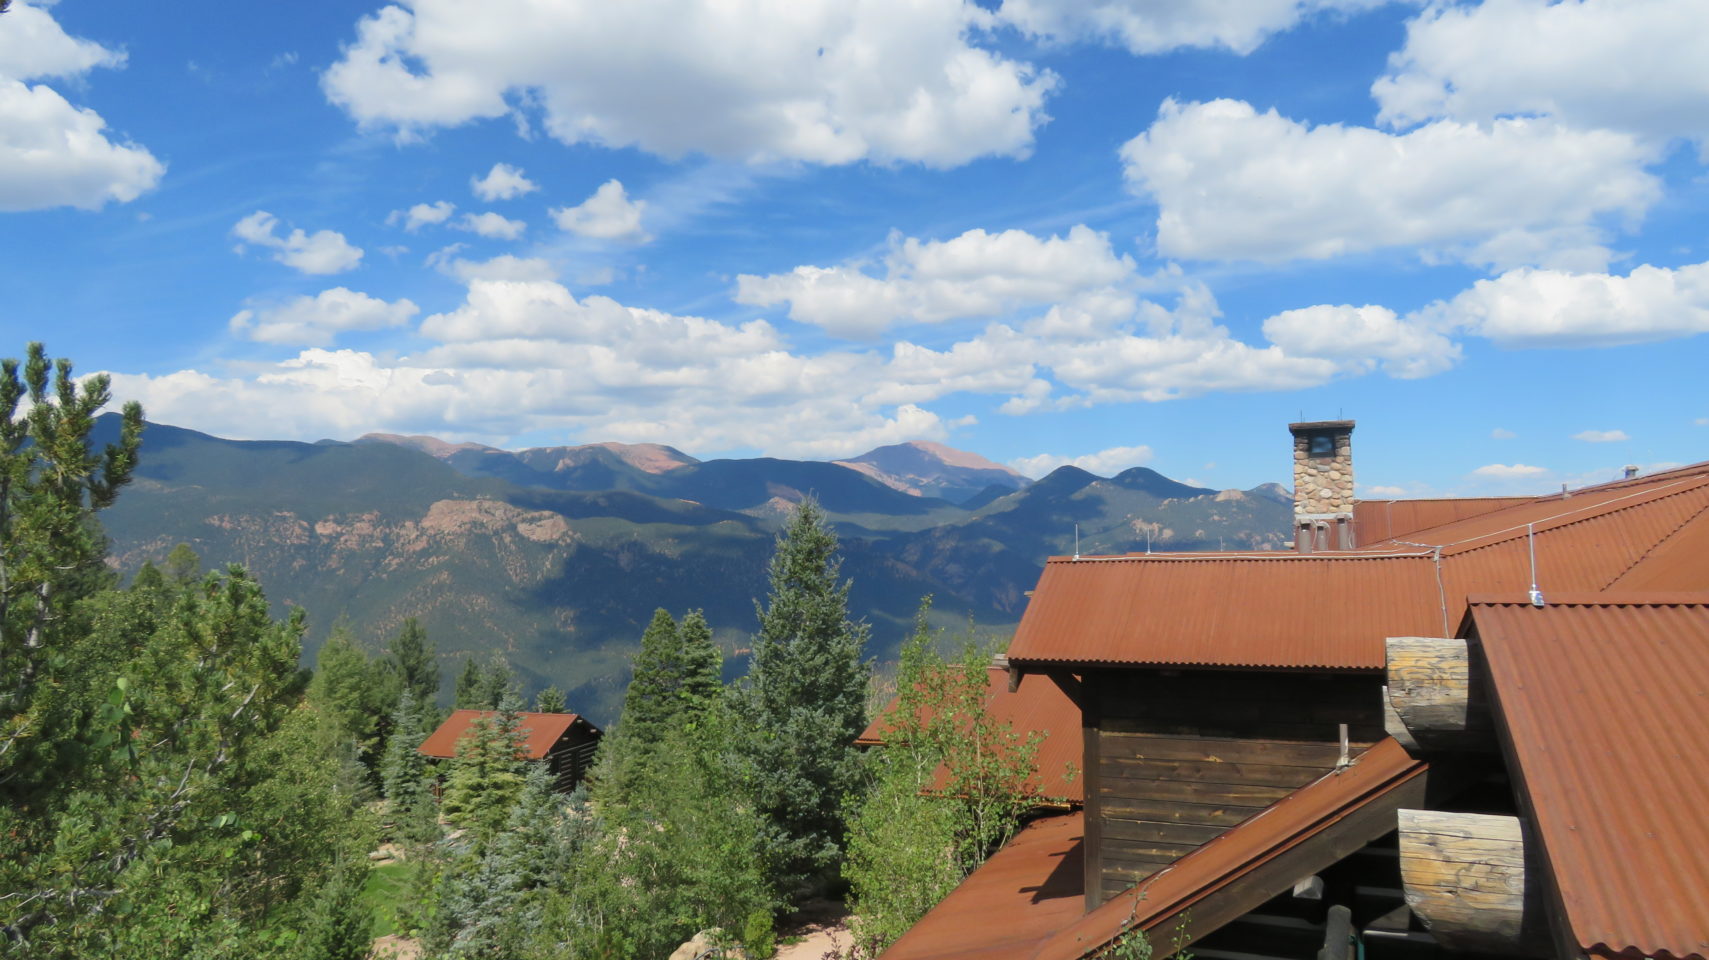 The Pikes Peak summit viewed from Cloud Camp at The Broadmoor